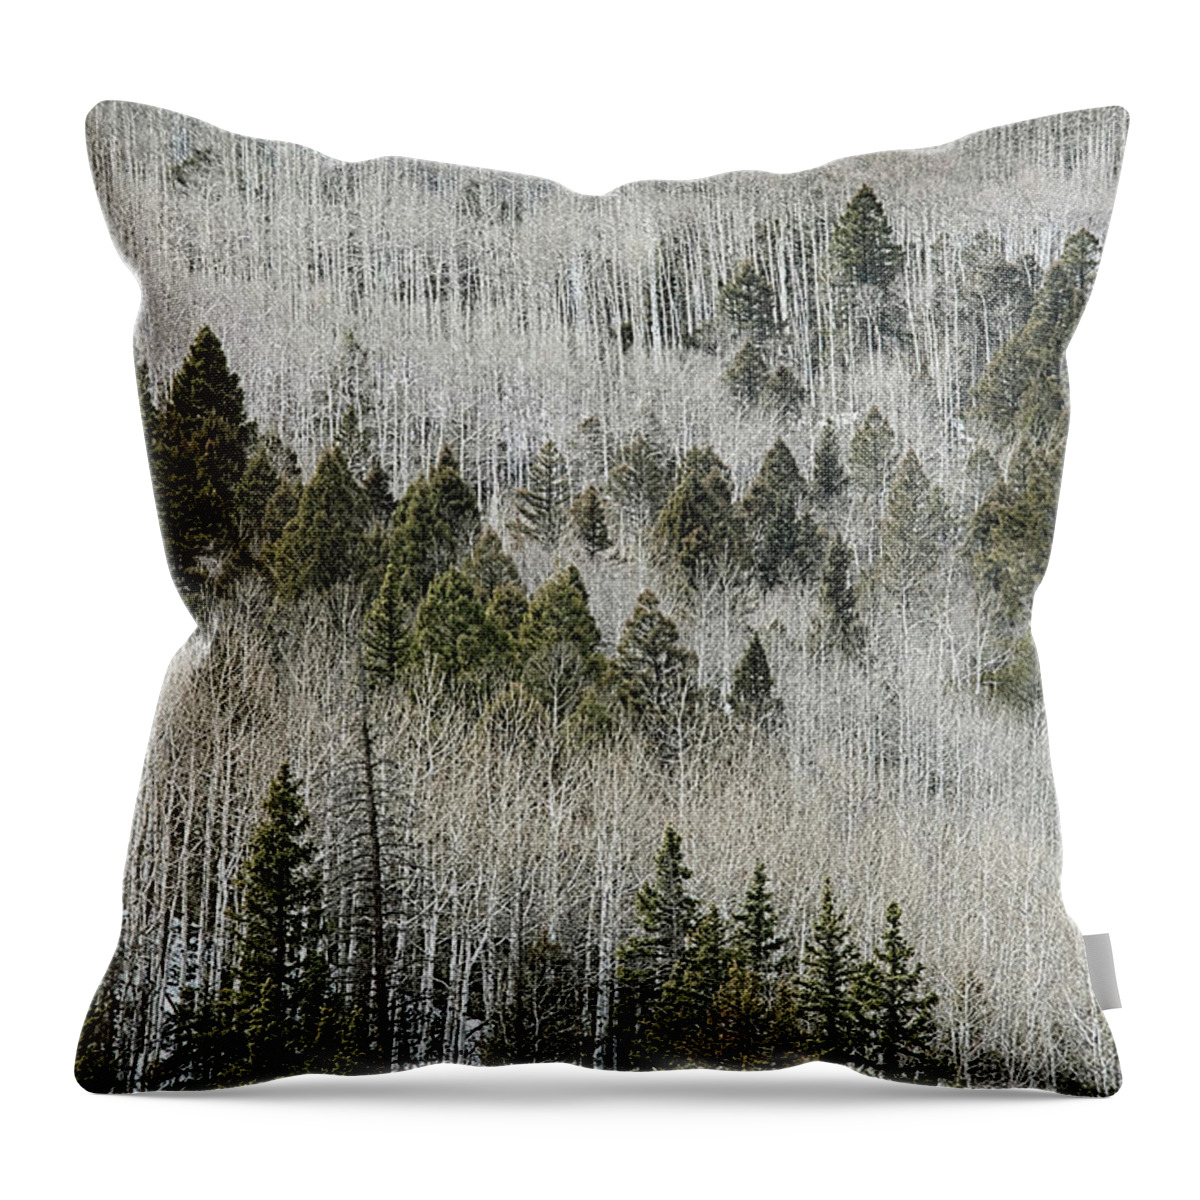 Trees Throw Pillow featuring the photograph Aspens In Spring by Ron Weathers